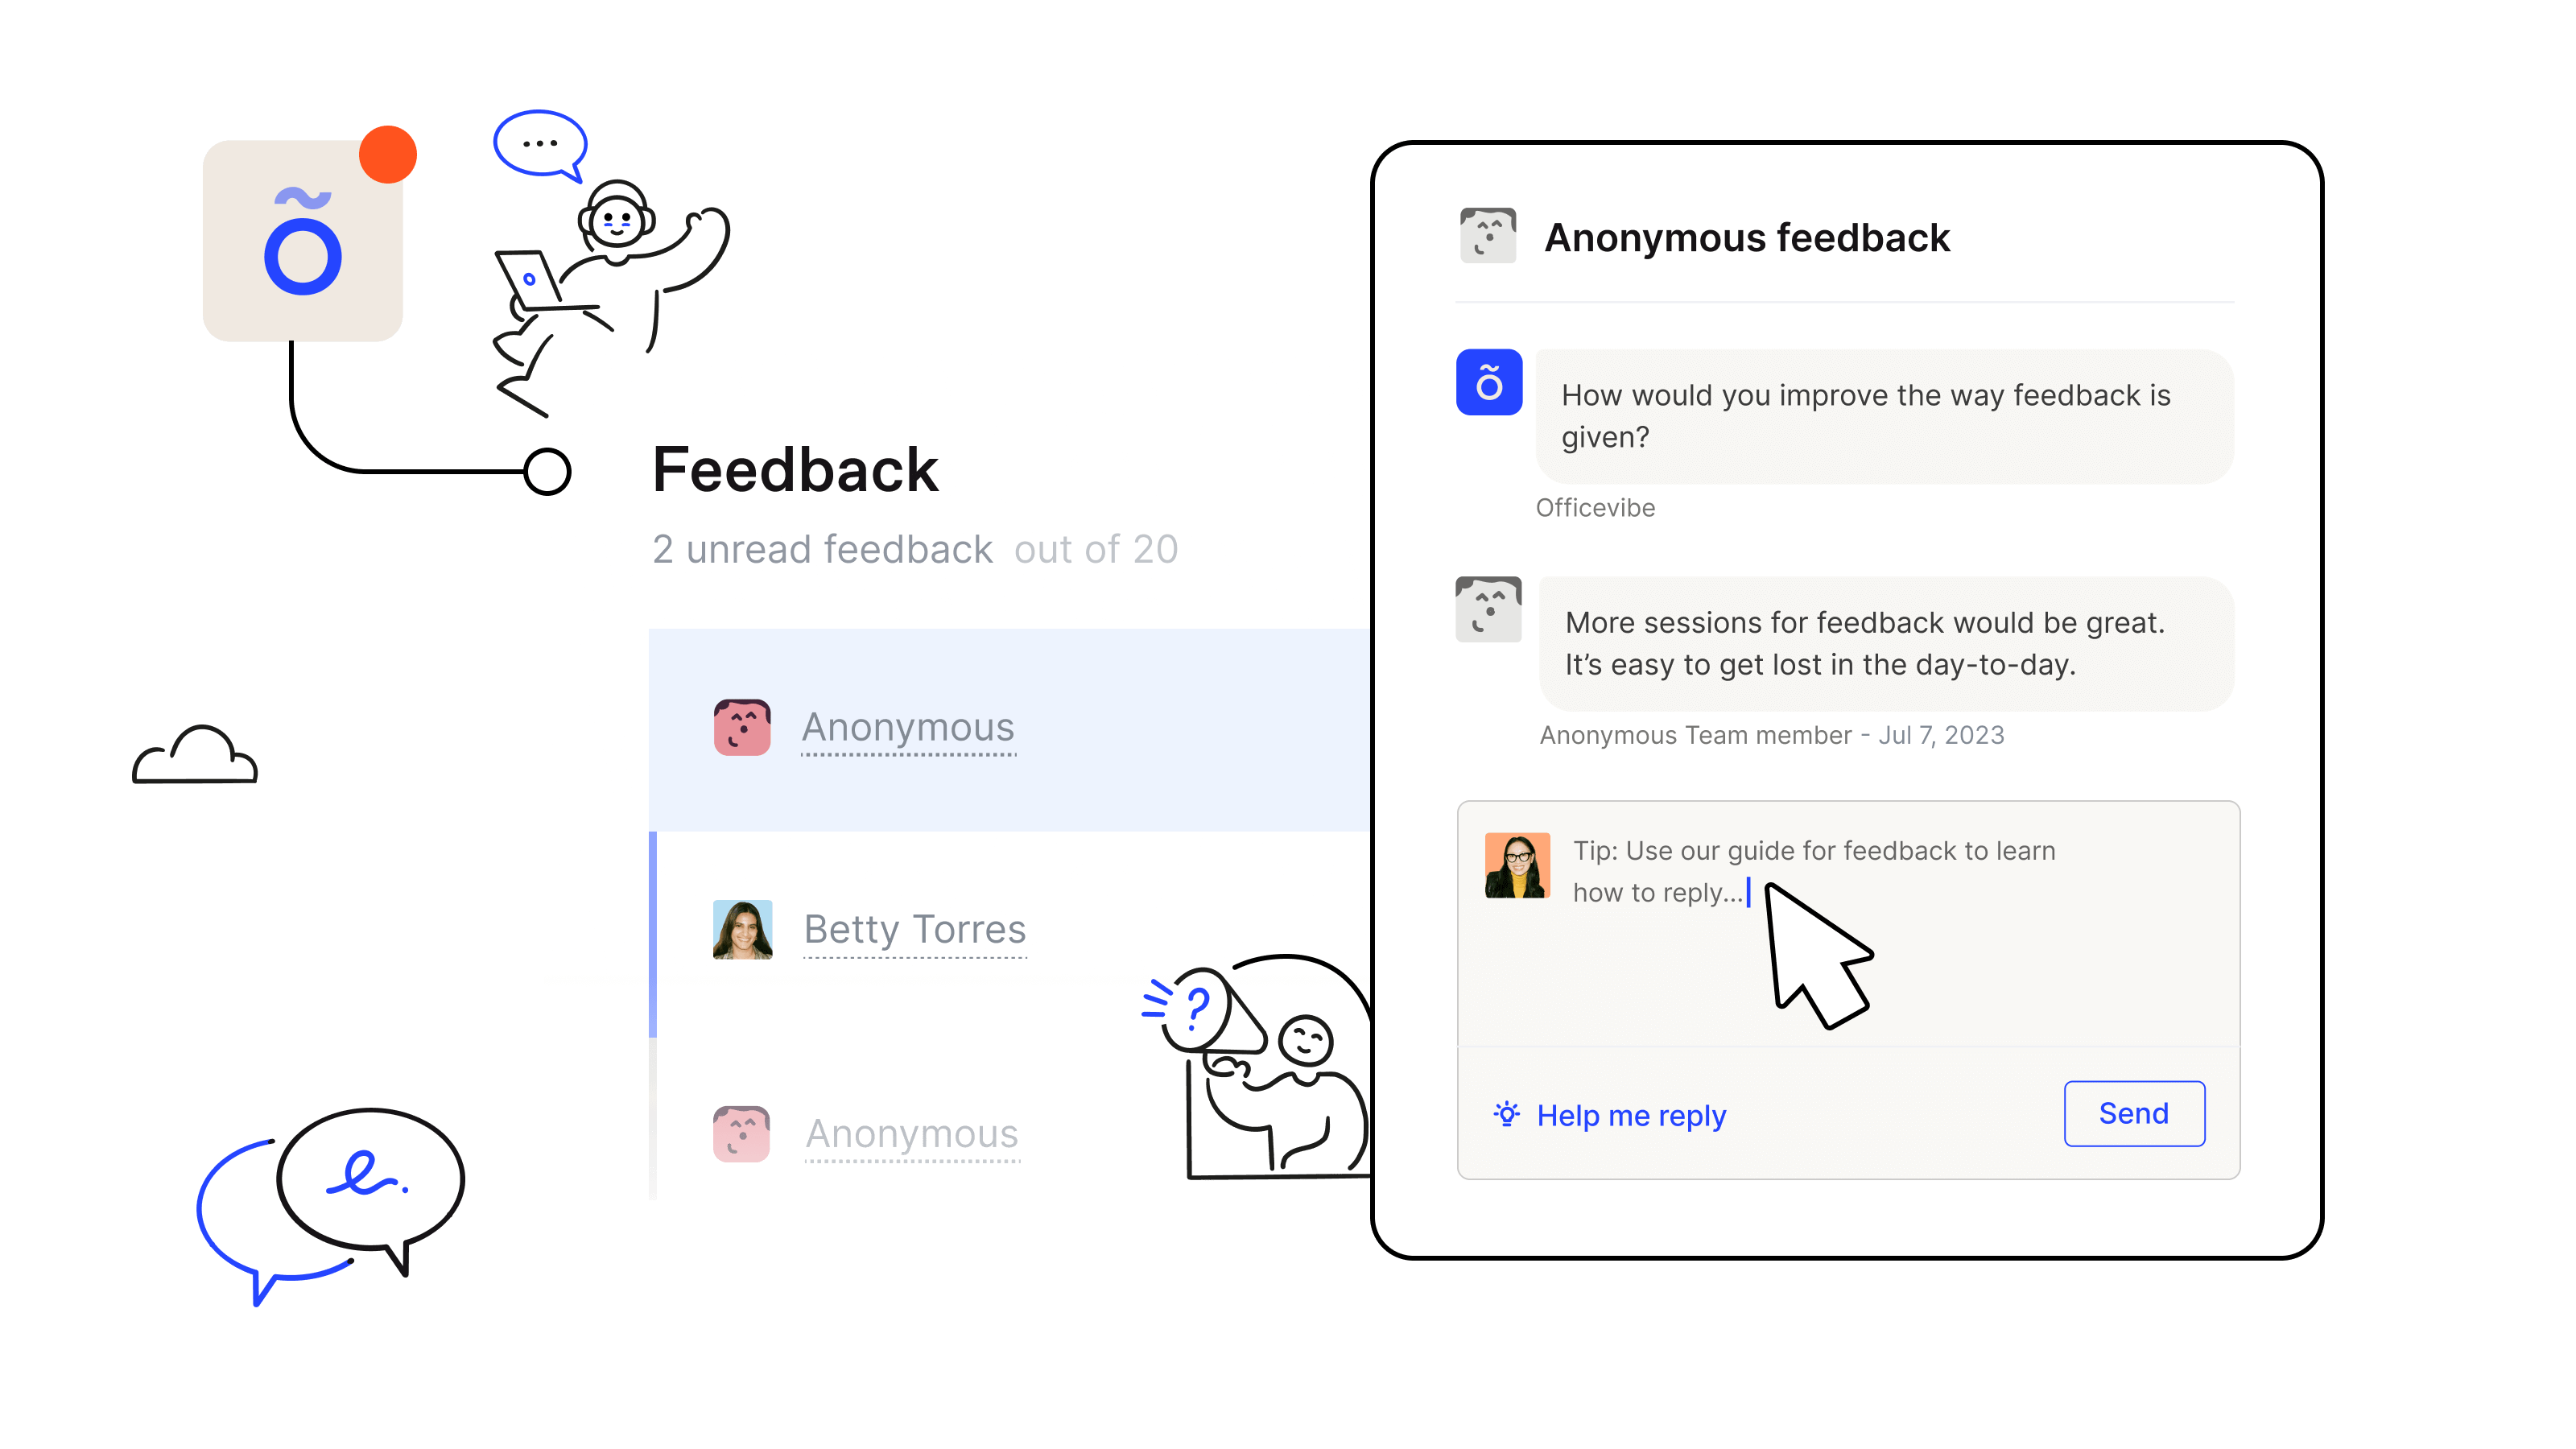 Officevibe Feedback management page to read, respond to and filter by team all the collected feedback.